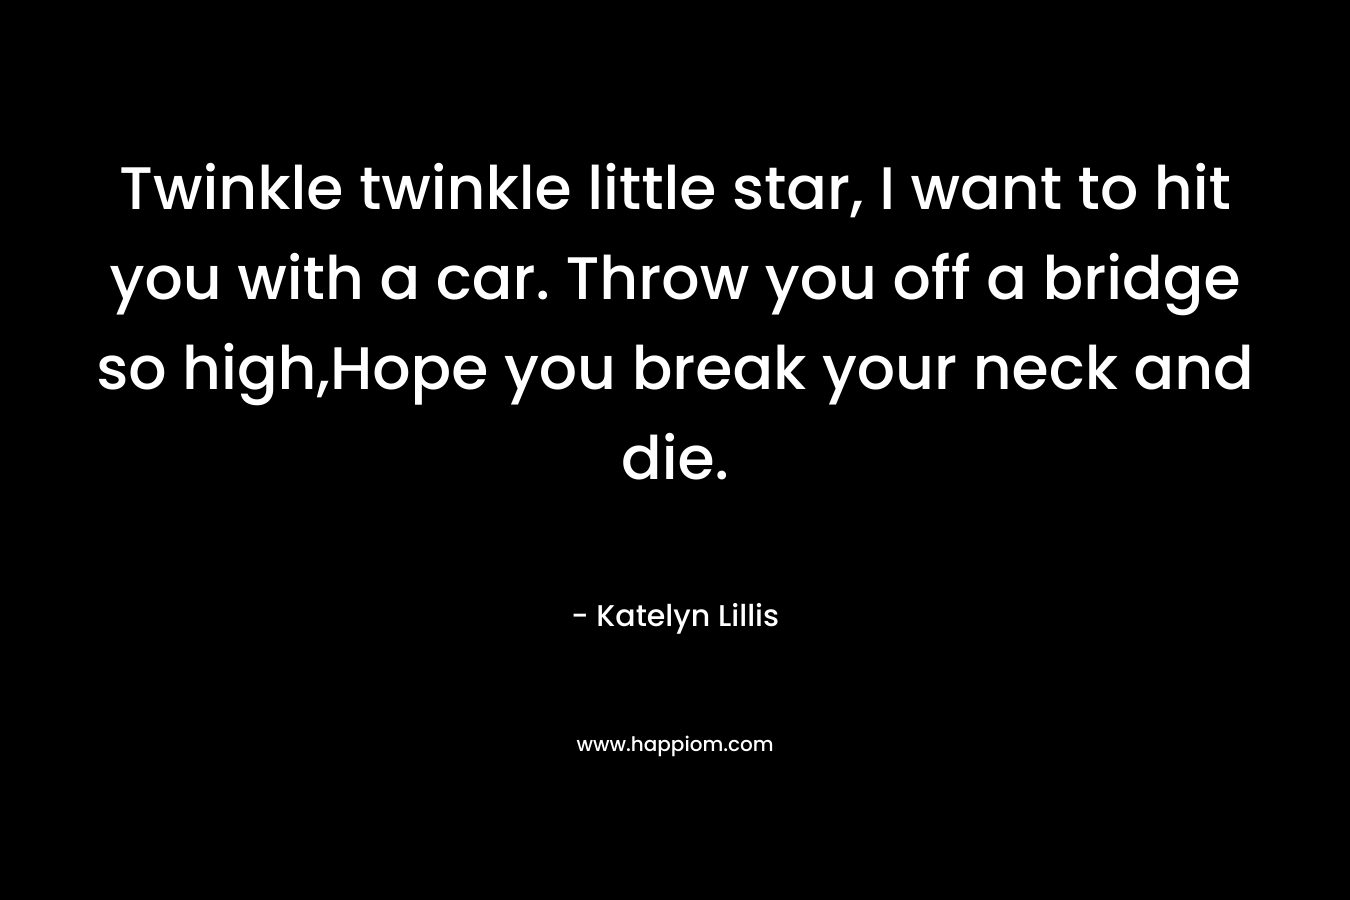 Twinkle twinkle little star, I want to hit you with a car. Throw you off a bridge so high,Hope you break your neck and die. – Katelyn Lillis